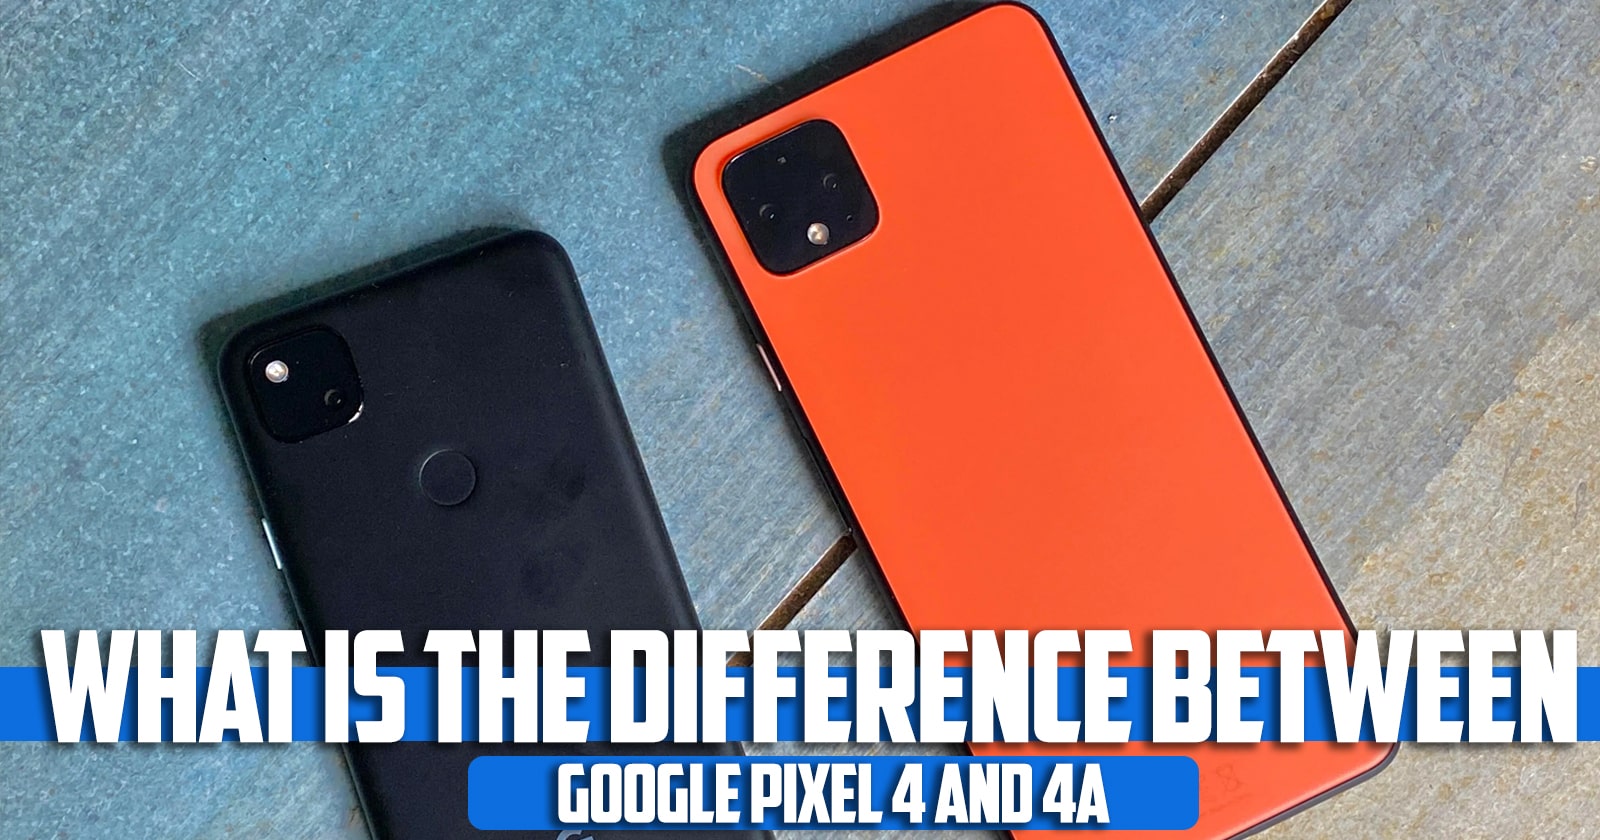 What is the difference between Google Pixel 4 and 4a?